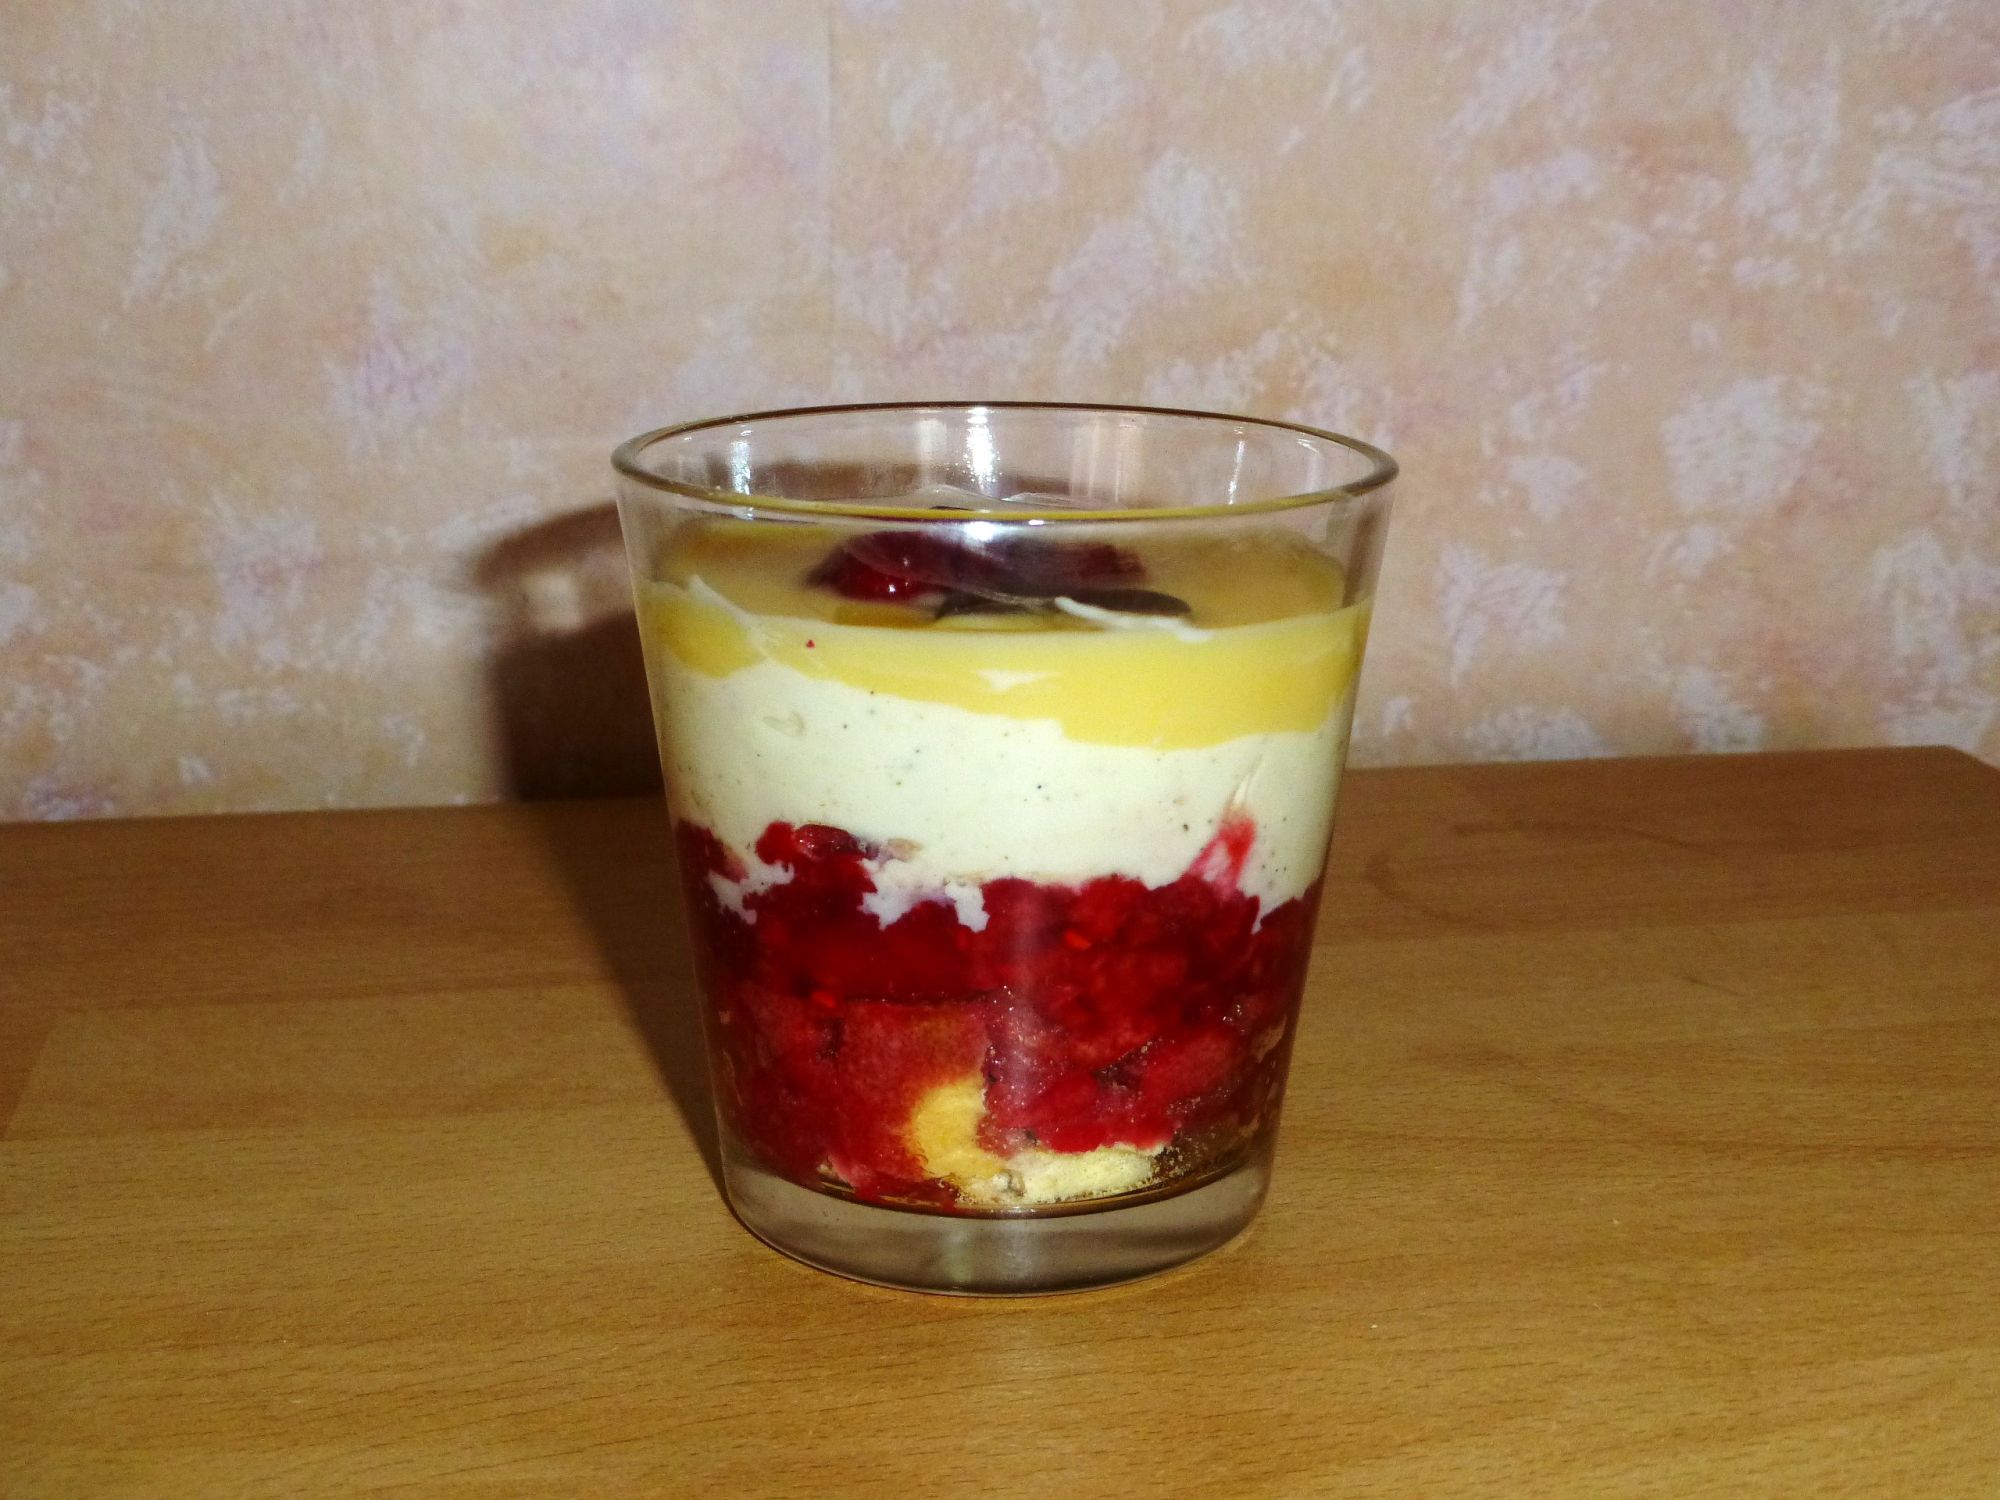 Himbeer-Vanille-Trifle